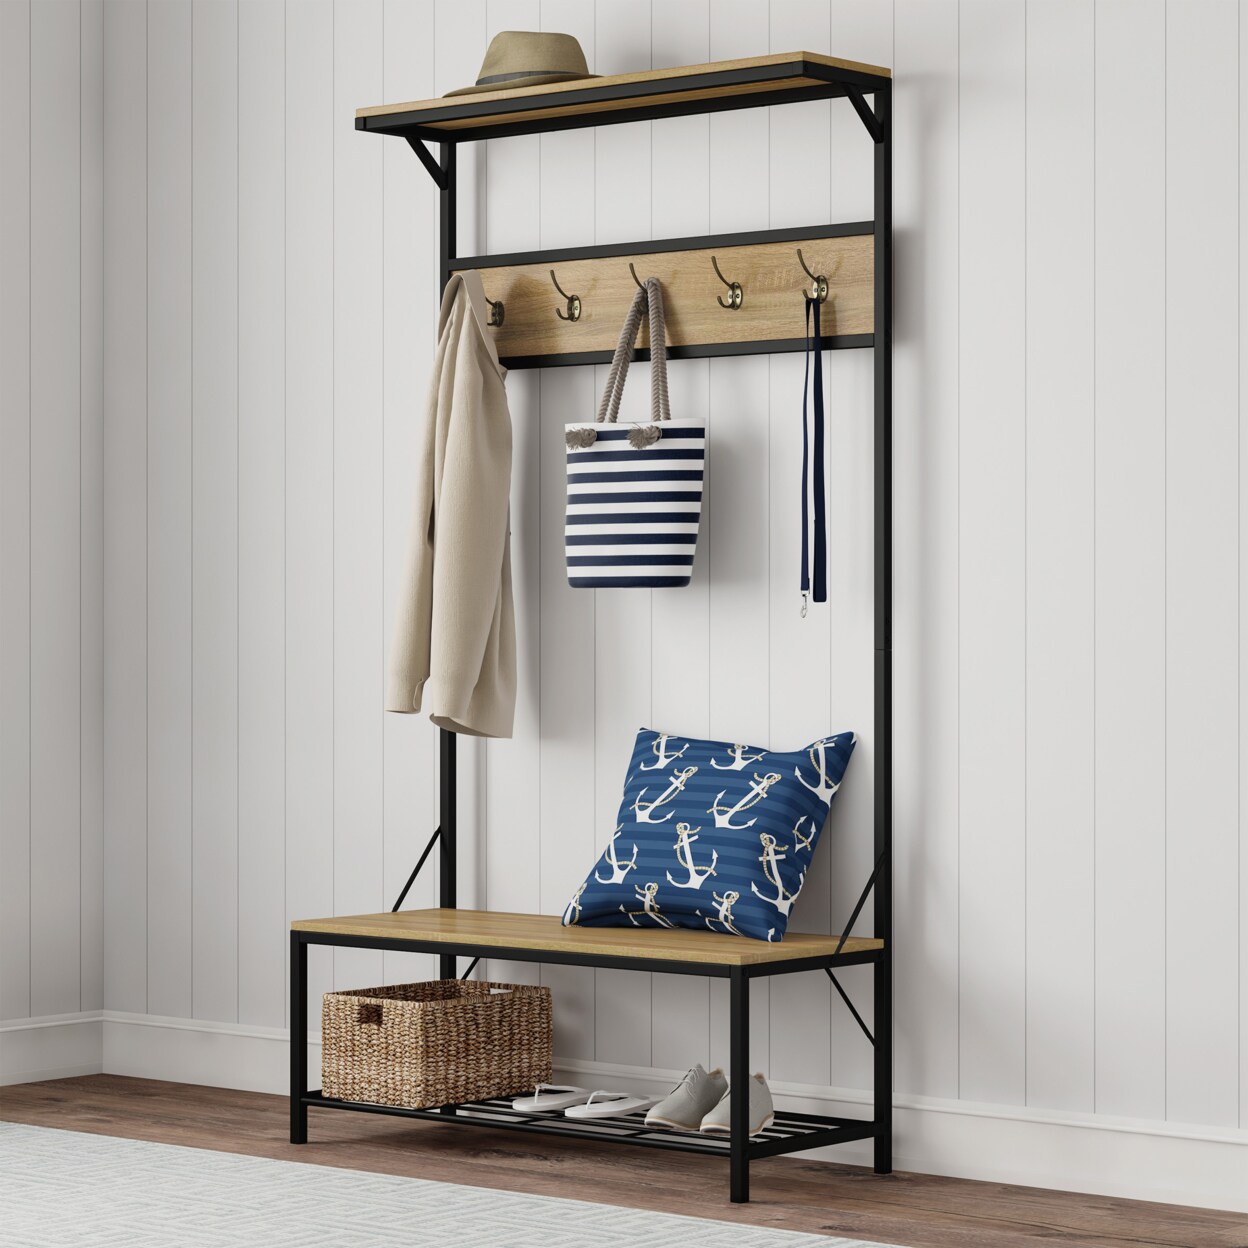 Lavish Home Entryway Storage Bench- Metal Hall Tree with Seat Coat Hooks  and Shoe Storage